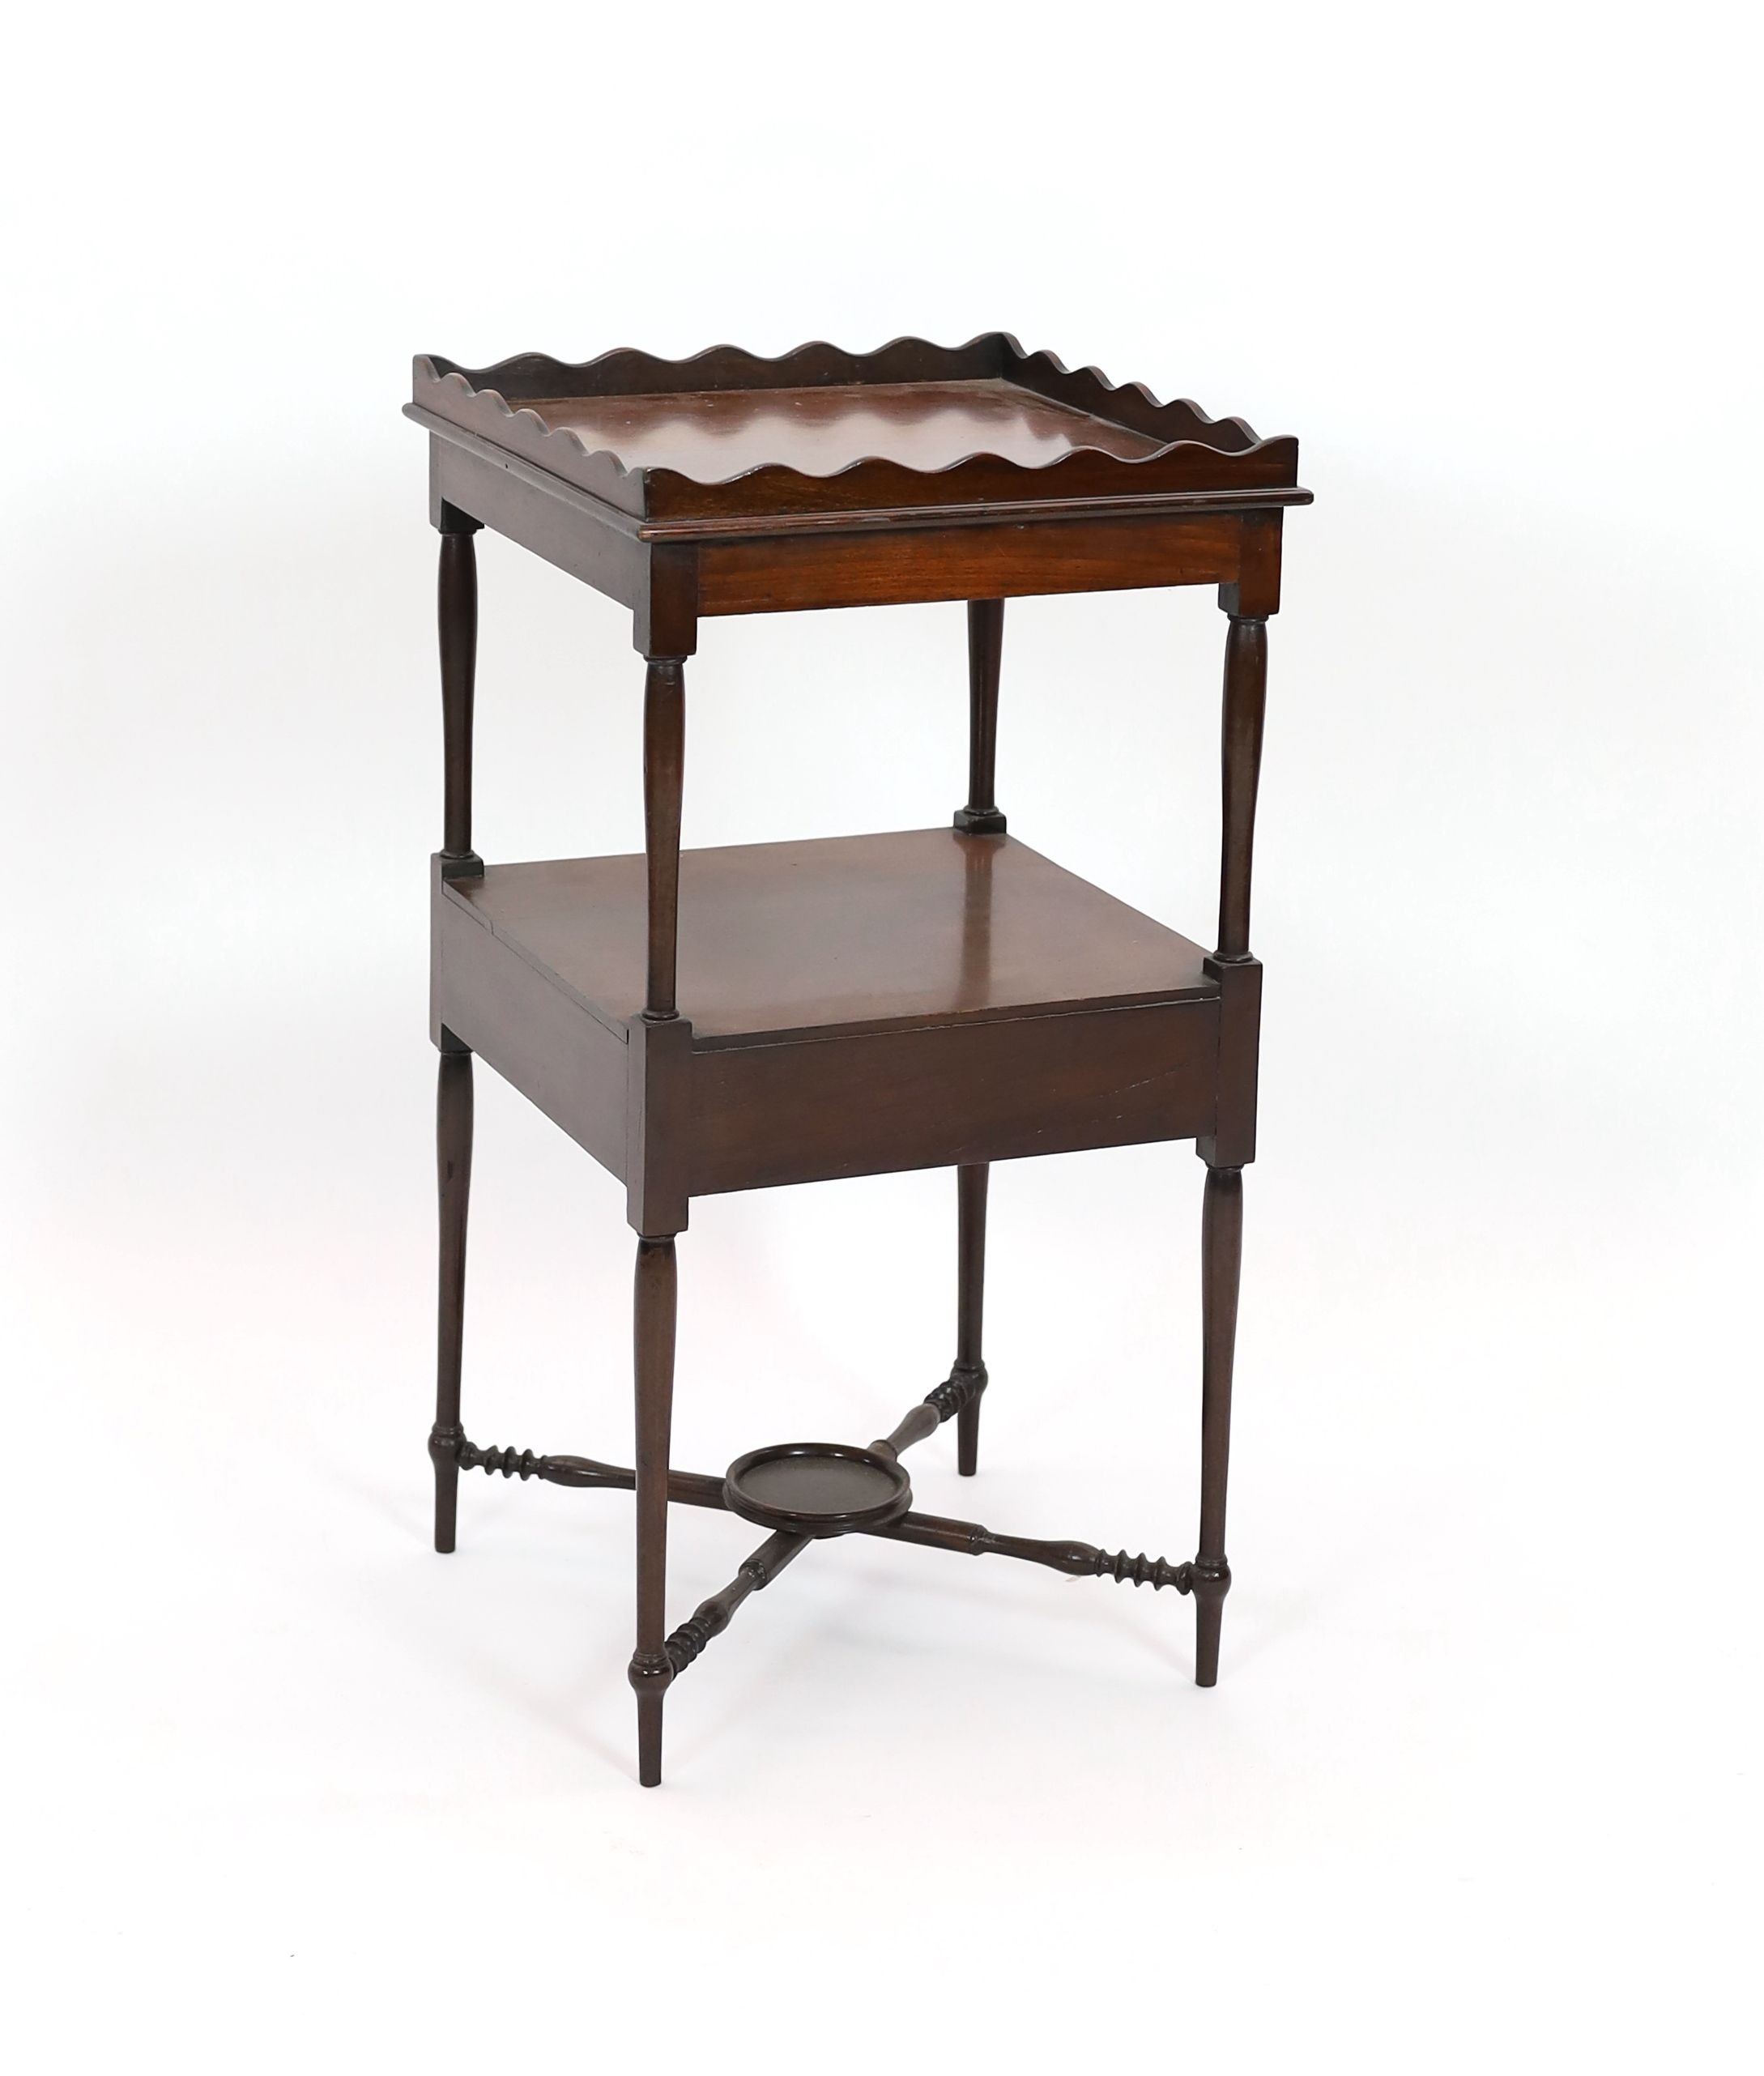 A George III and later mahogany two tier wash stand, width 43cm depth 43cm height 82cm